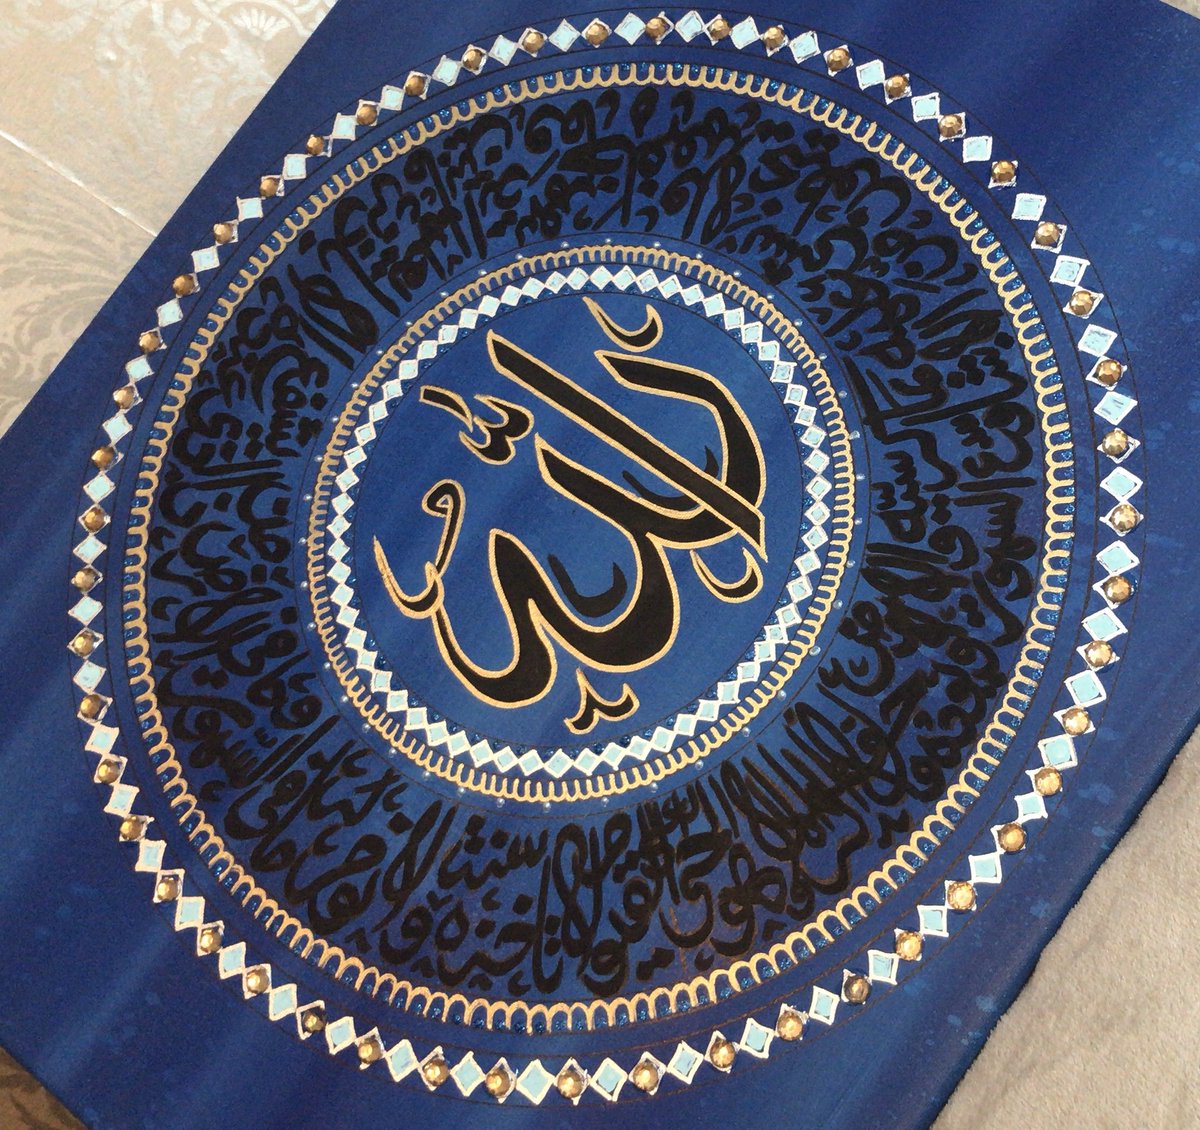 50cm x 60cm Ayat ul Kursi canvas made as requested by the brotherZahrArts Instagram: zm_canvas_art